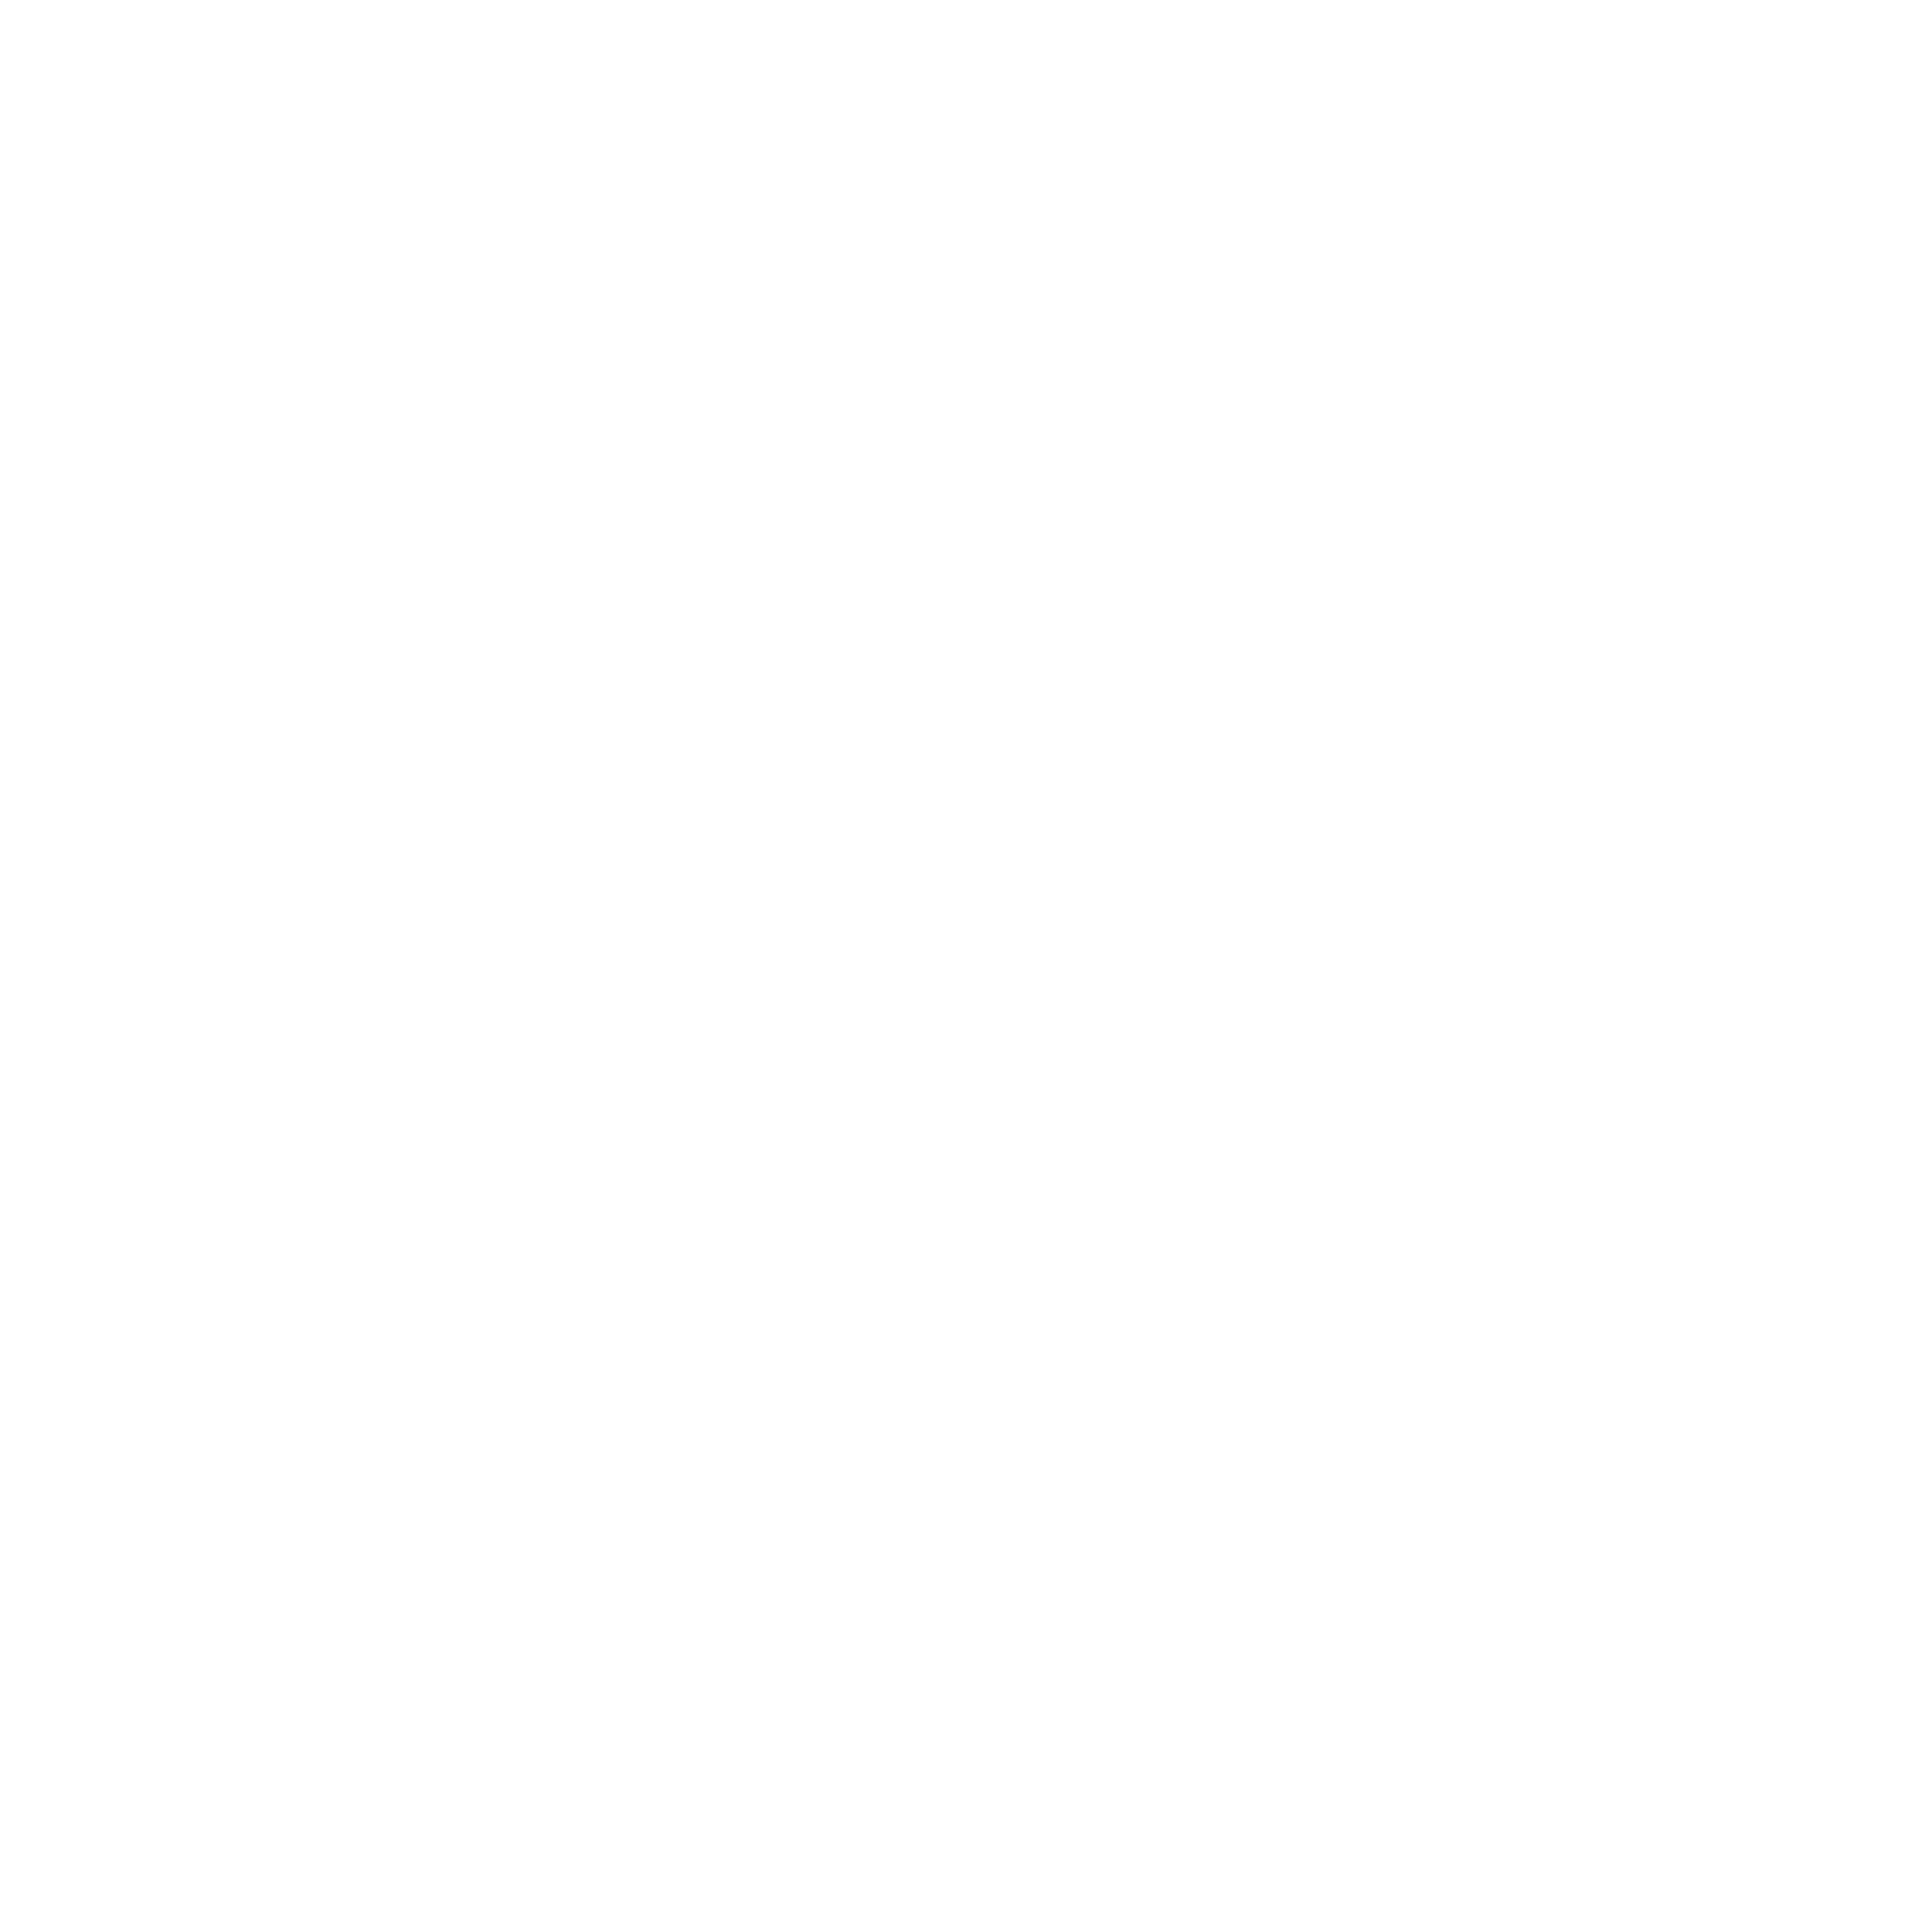 dancing-with-her-white.png